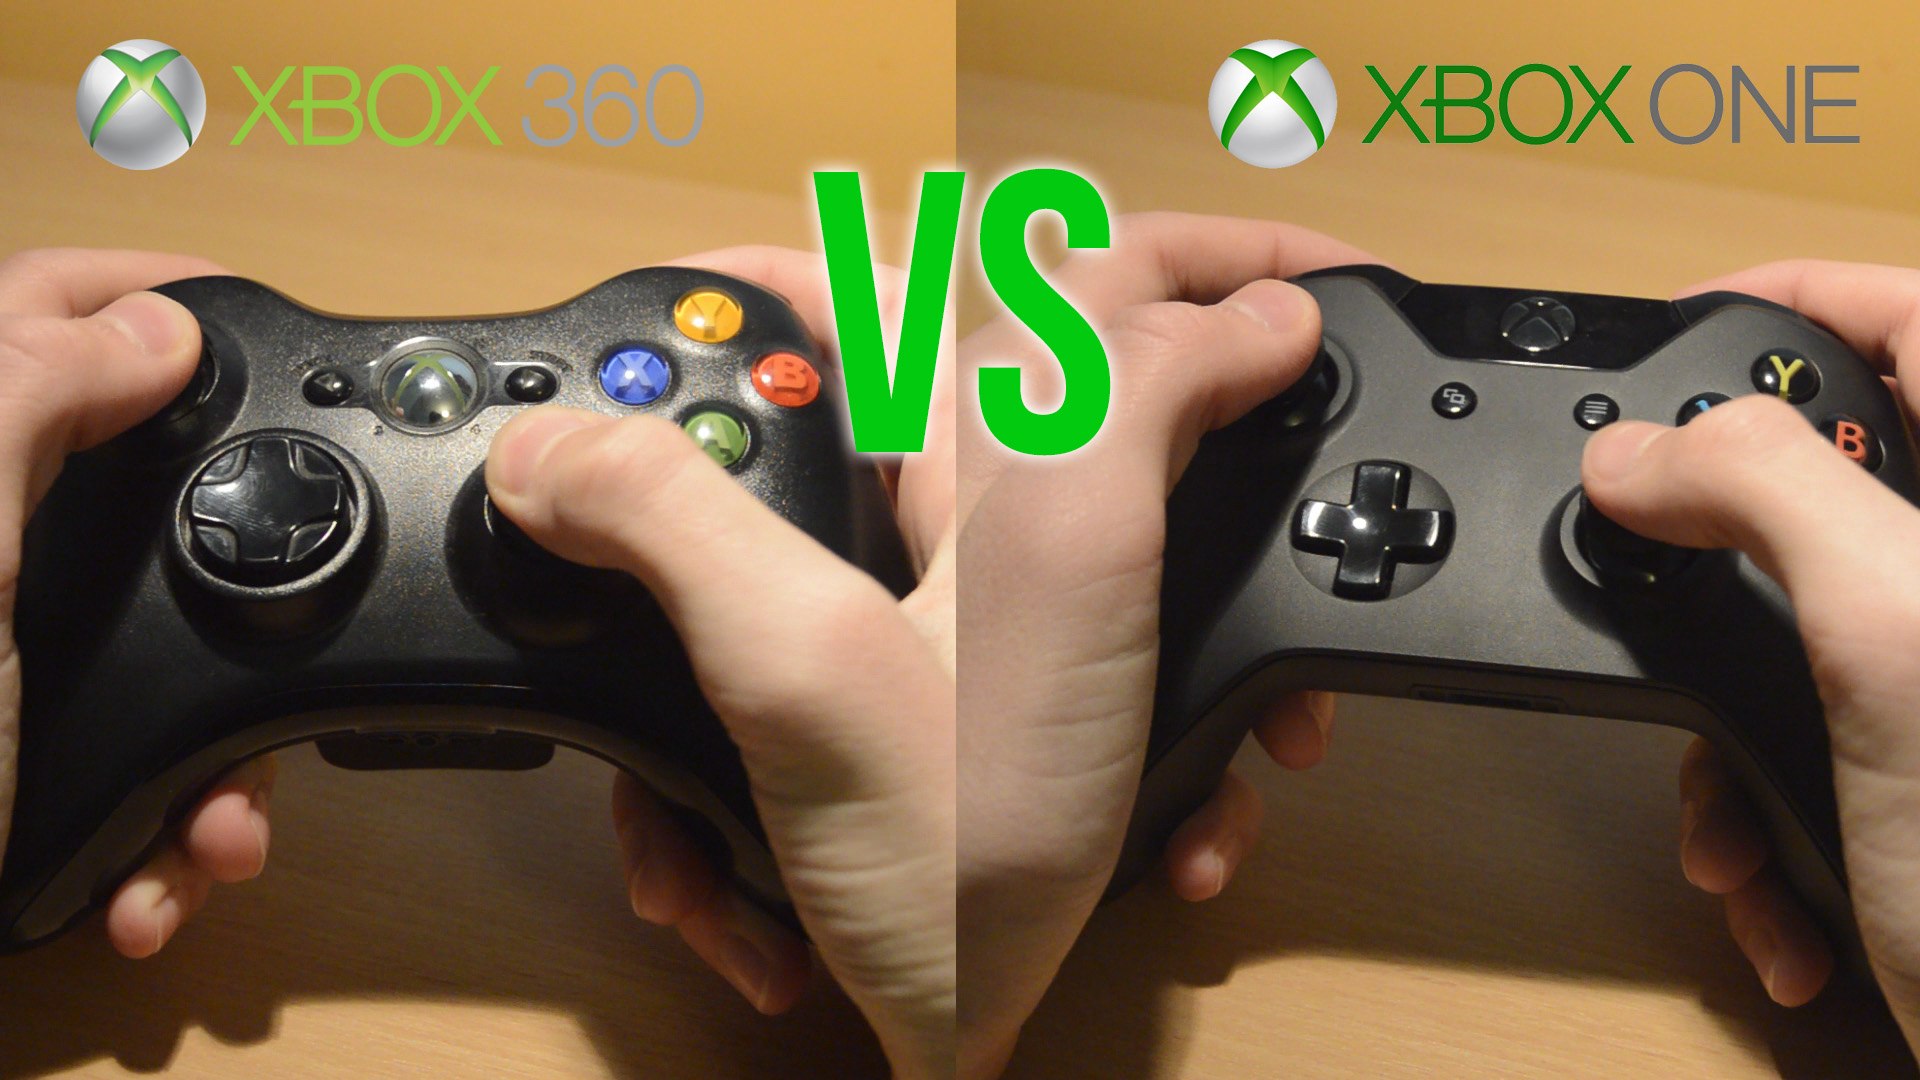 can i use my xbox 360 controller on xbox one